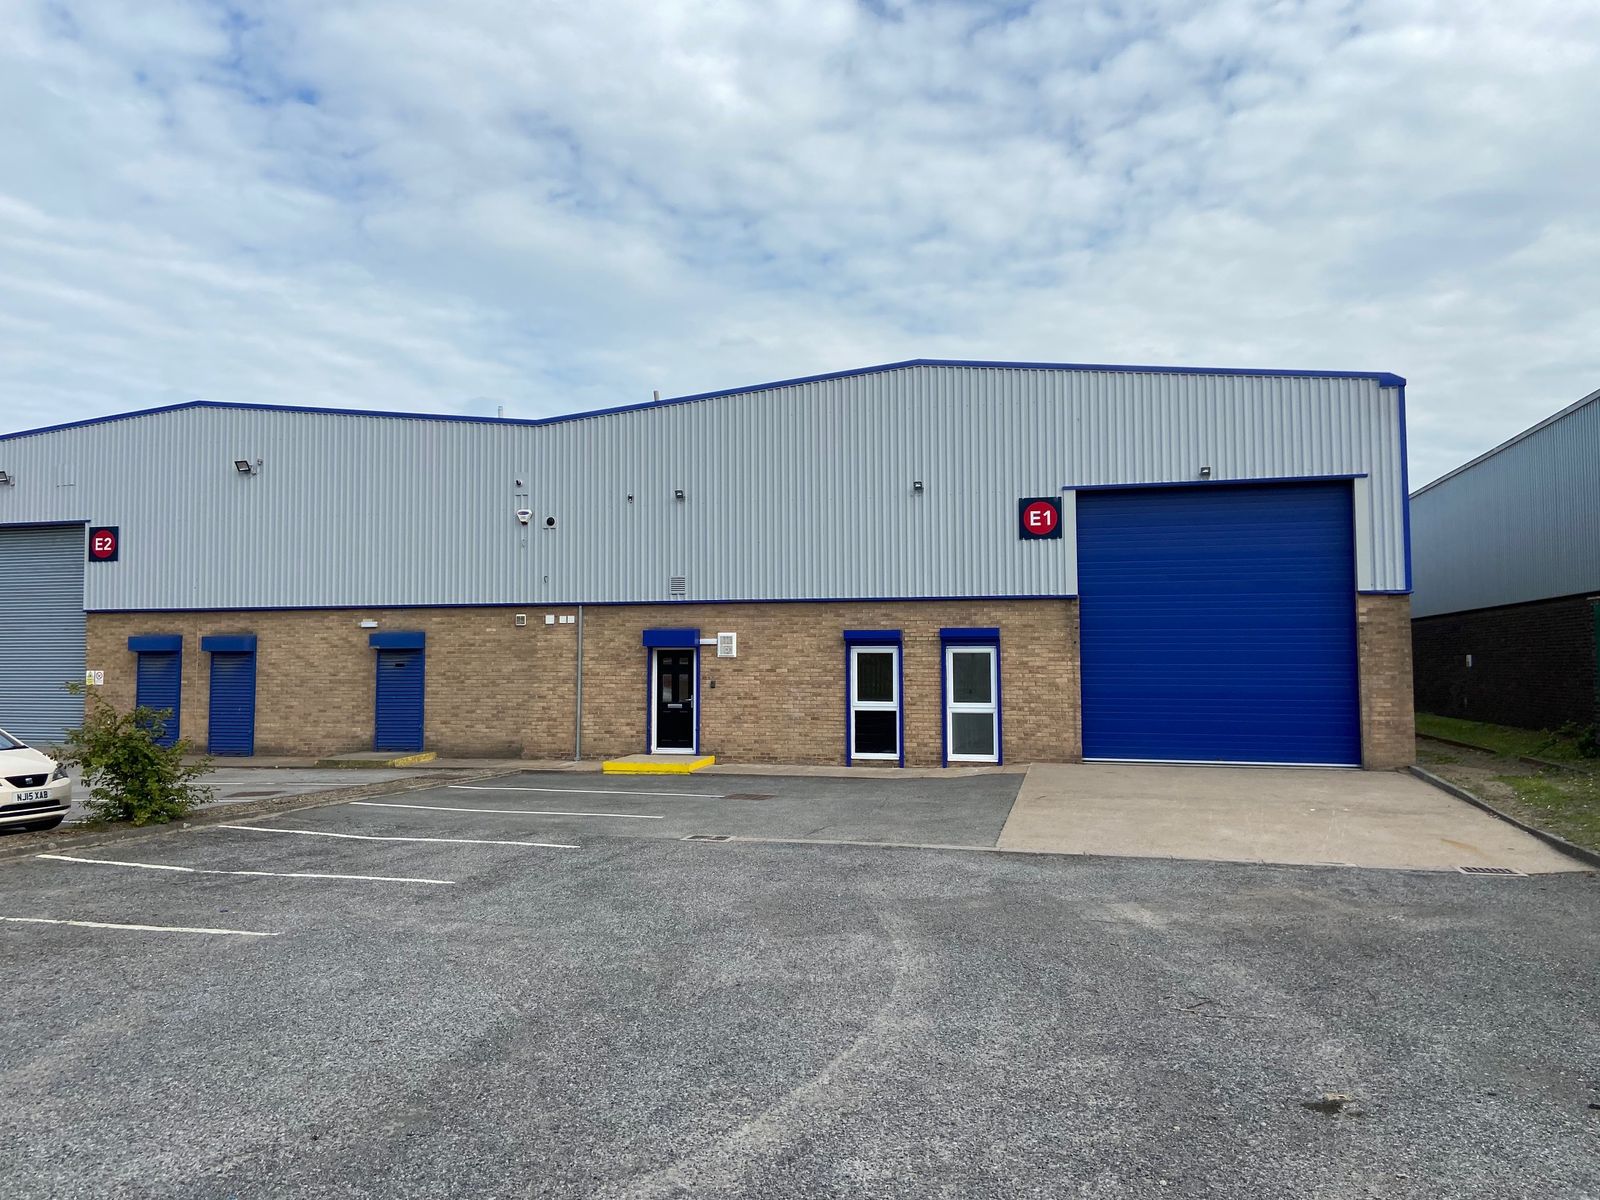 SK Sales Ltd takes 10-year lease at Copley Hill Trading Estate